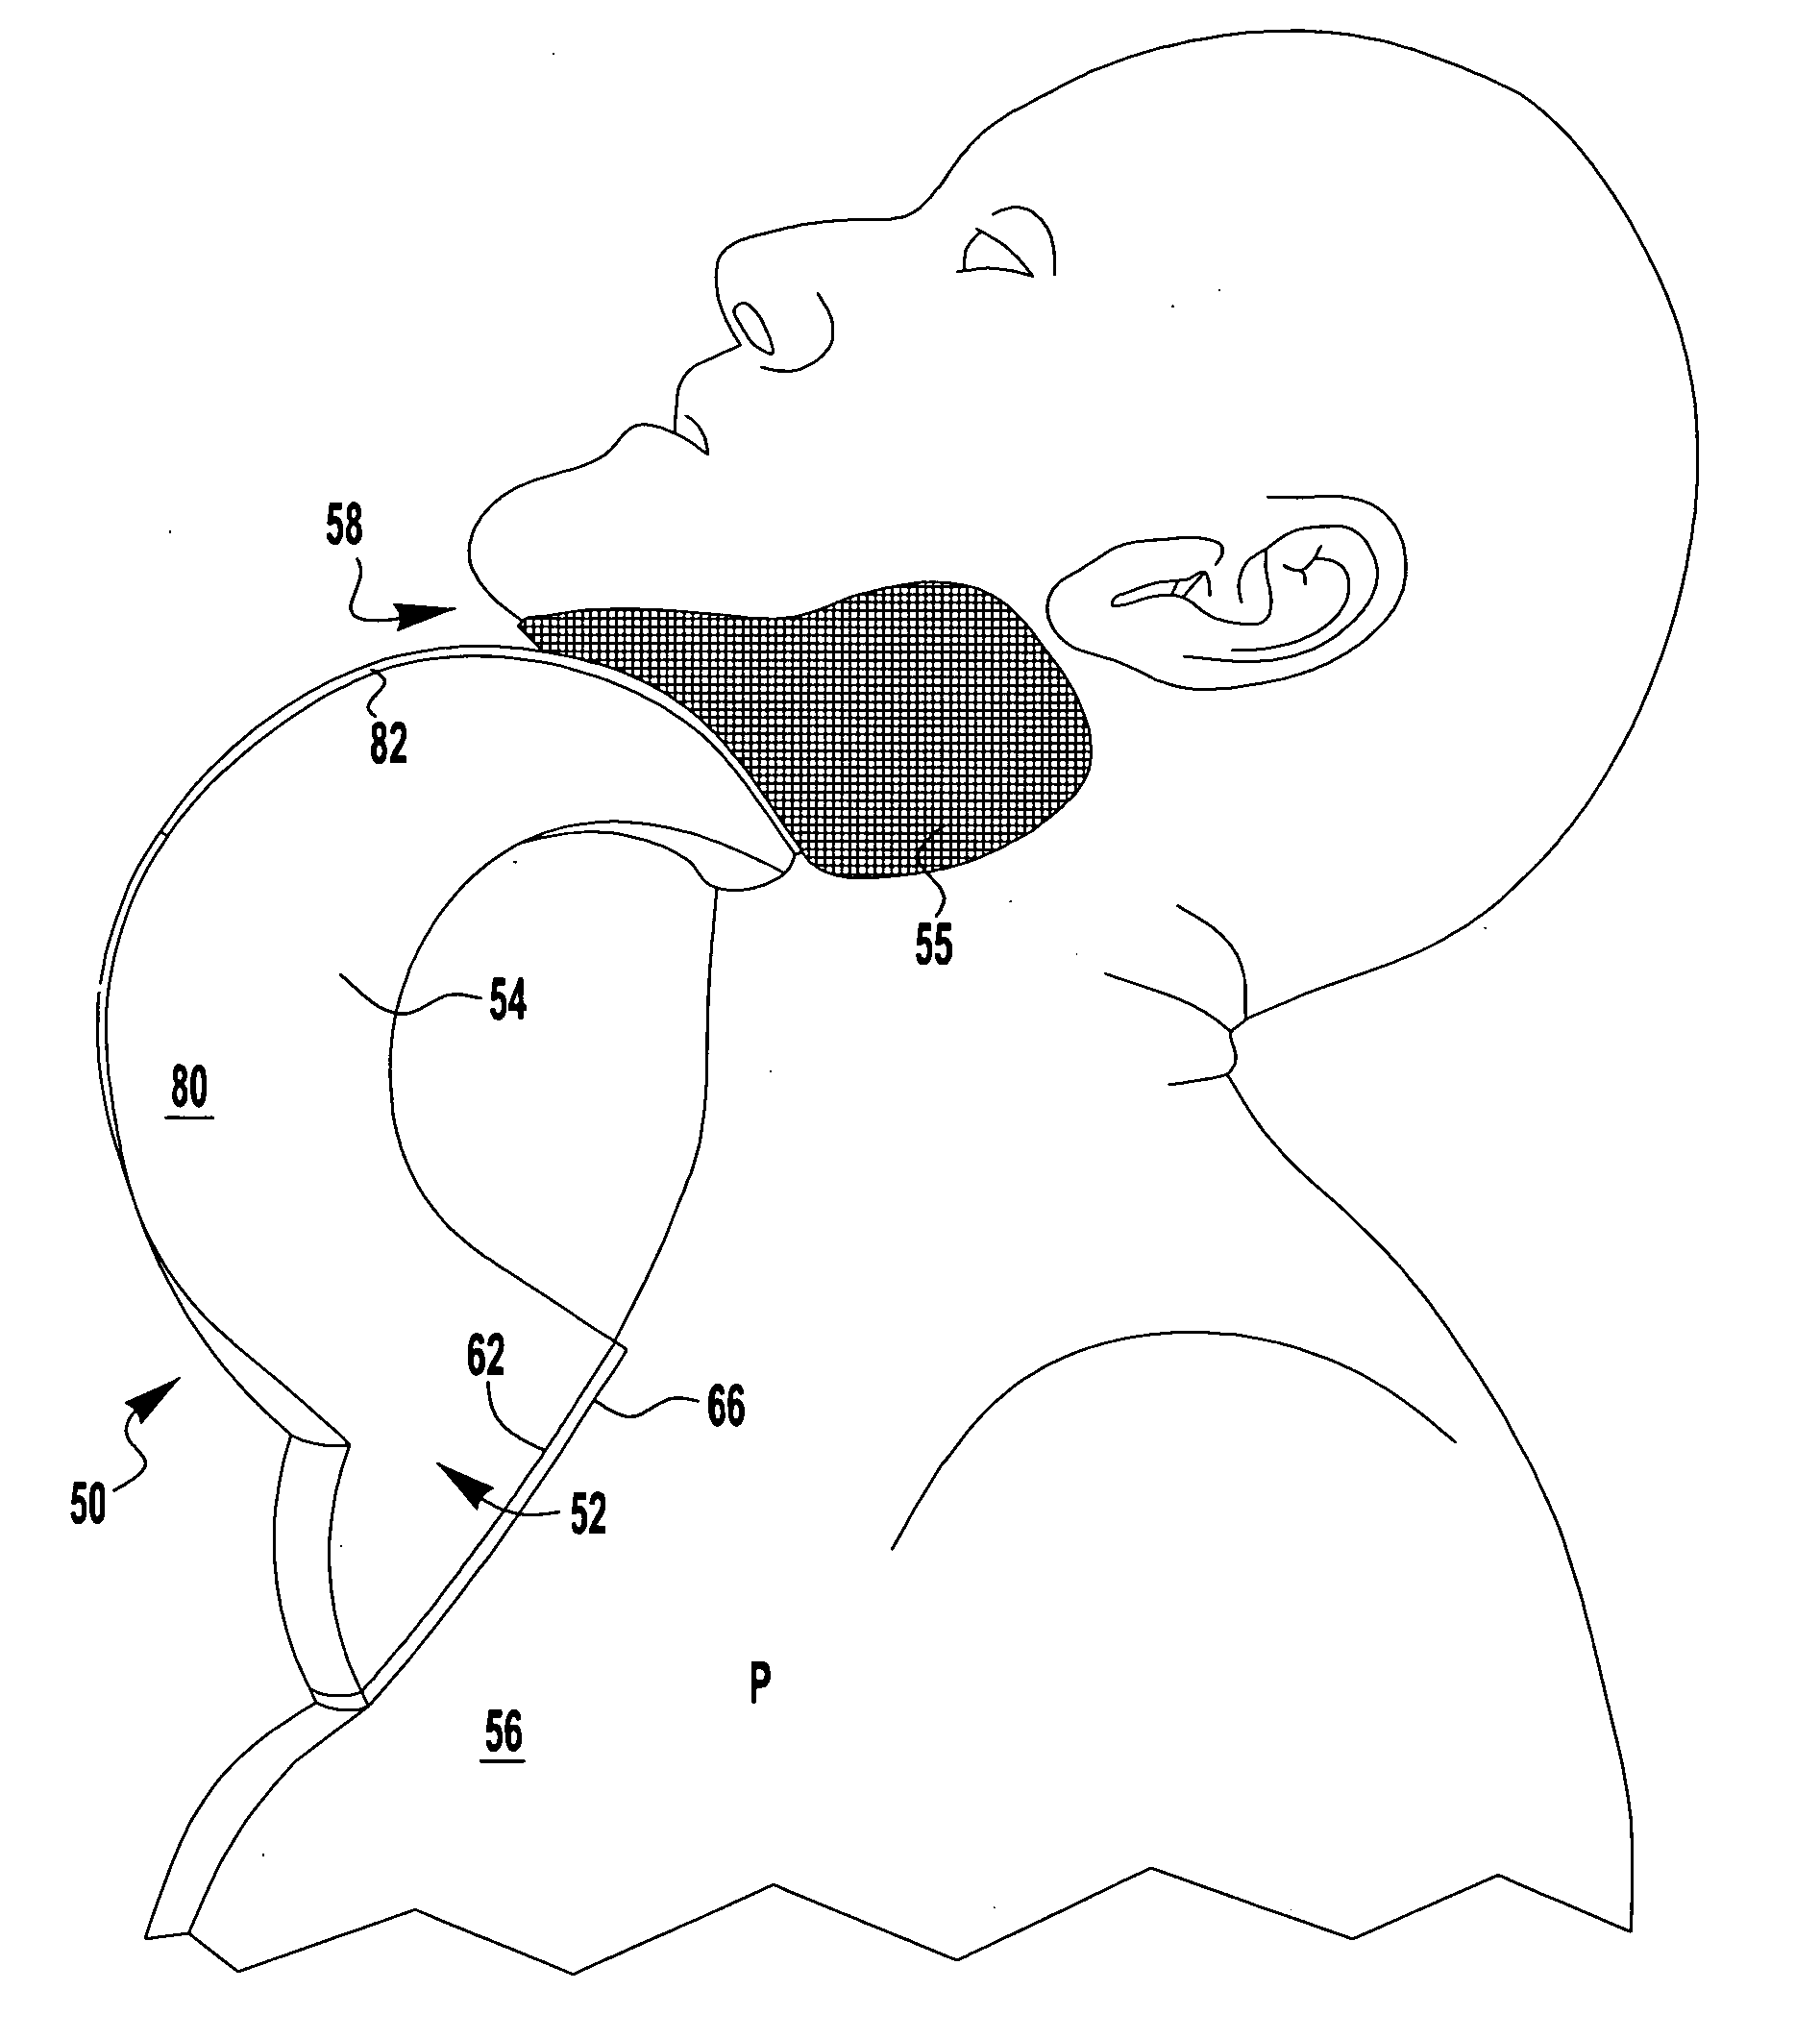 Therapeutic/diagnostic external airway position support (EAPS) device and method